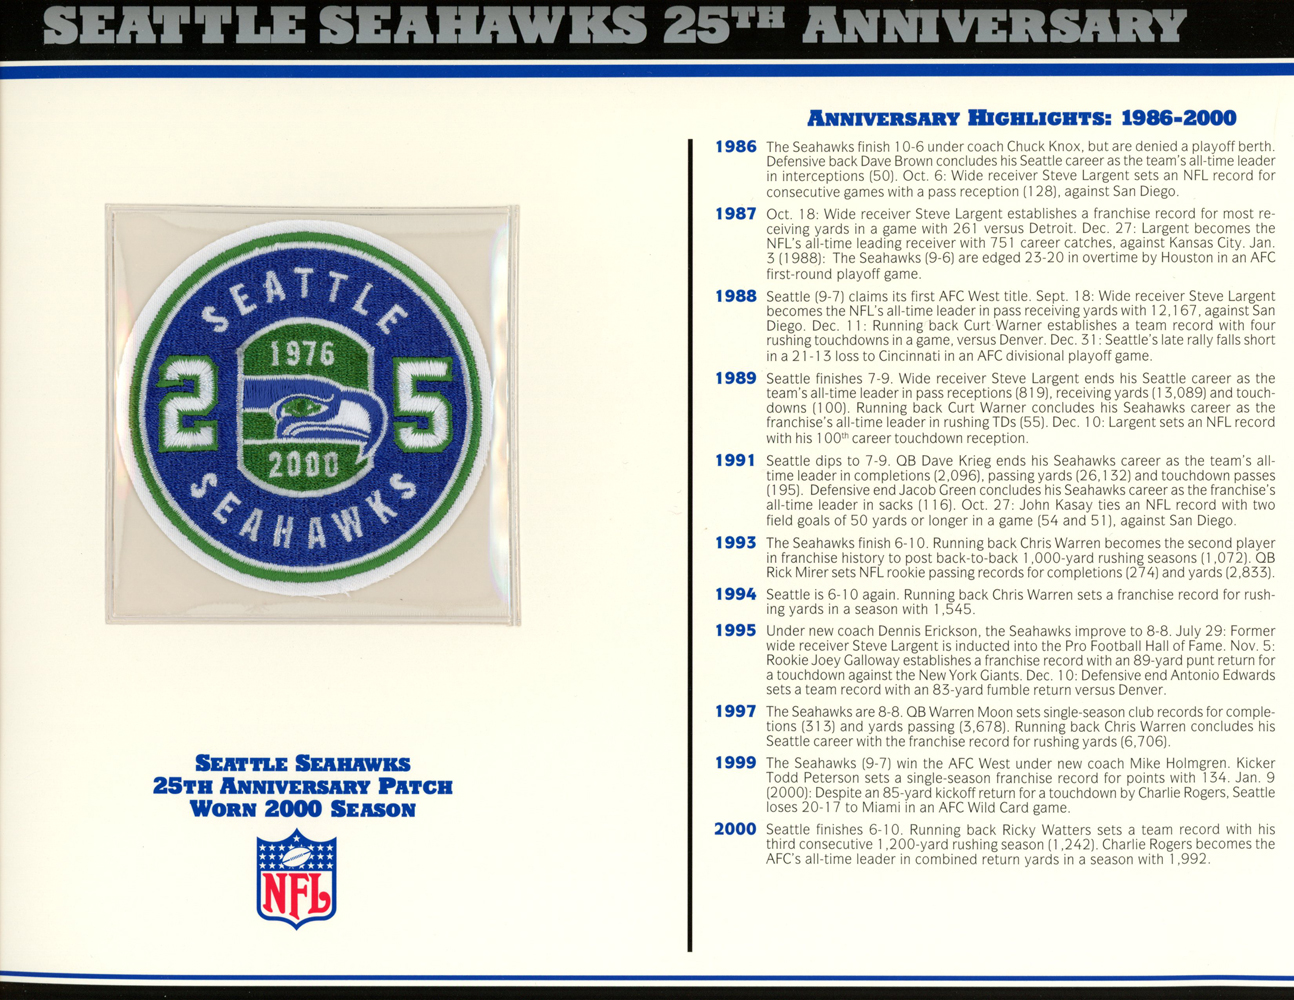 A throwback debut: DK Metcalf tops Steve Largent's rookie record in  Seahawks' victory over Bengals